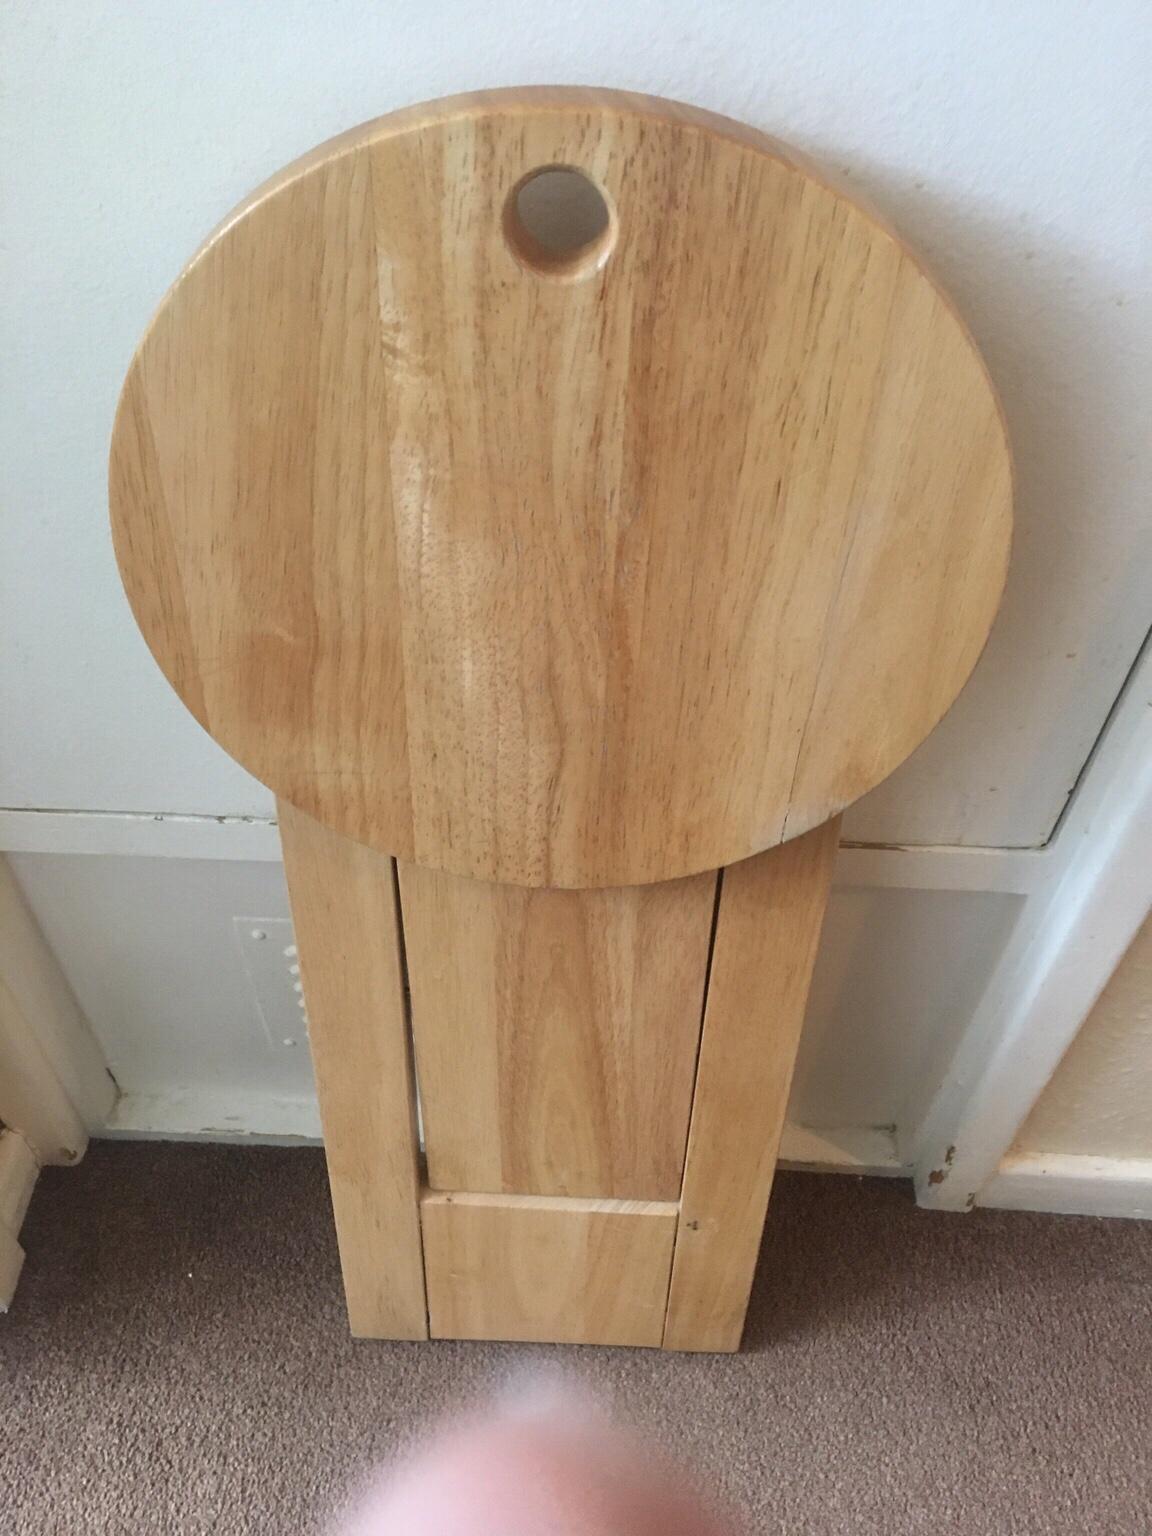 Wooden folding stool/table in LE5 Leicester for £22.00 for sale Shpock